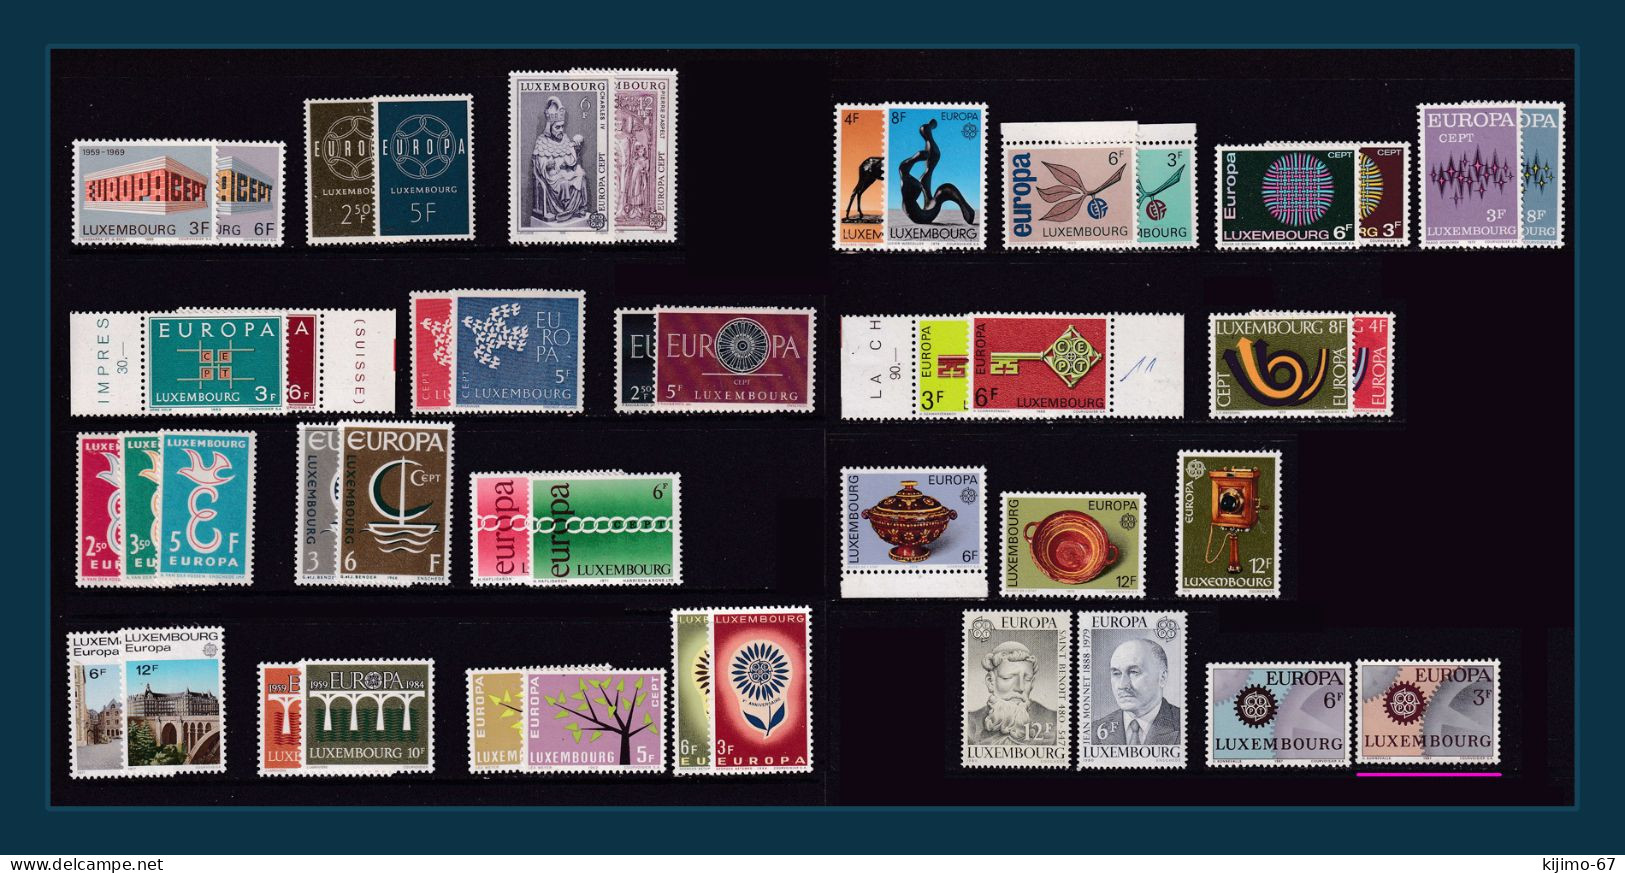 EUROPA Lot 46 Timbres Luxembourg Neufs - Lots & Kiloware (mixtures) - Max. 999 Stamps